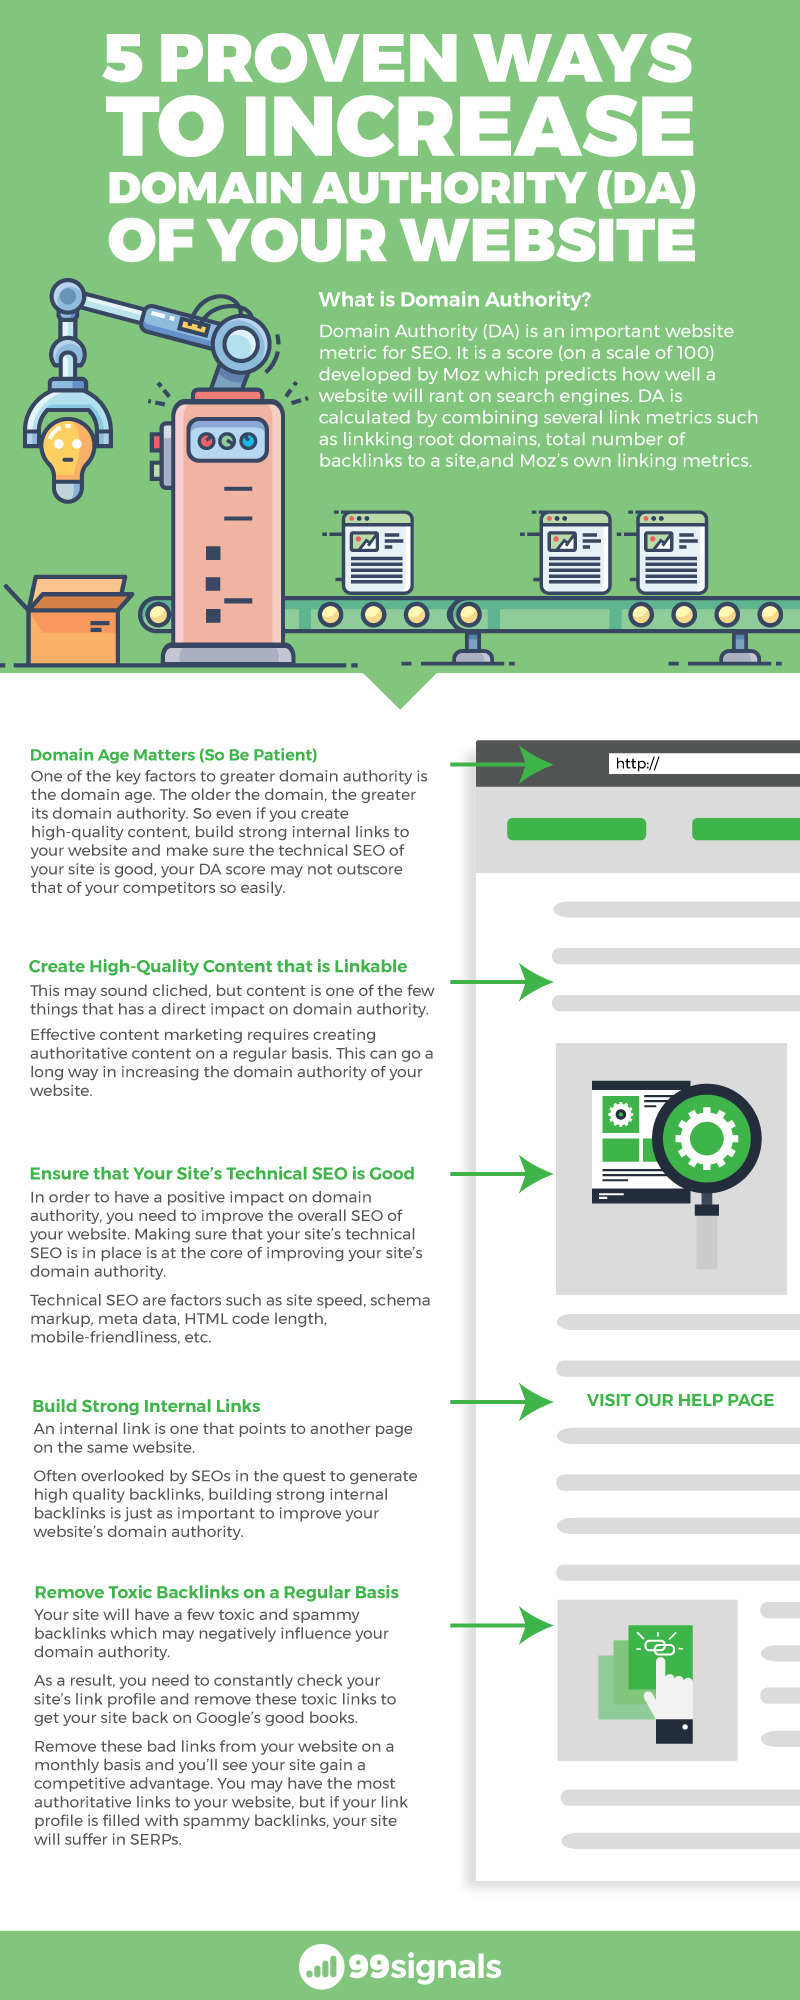 5 Proven Ways to Increase Domain Authority (DA) of Your Website — Infographic